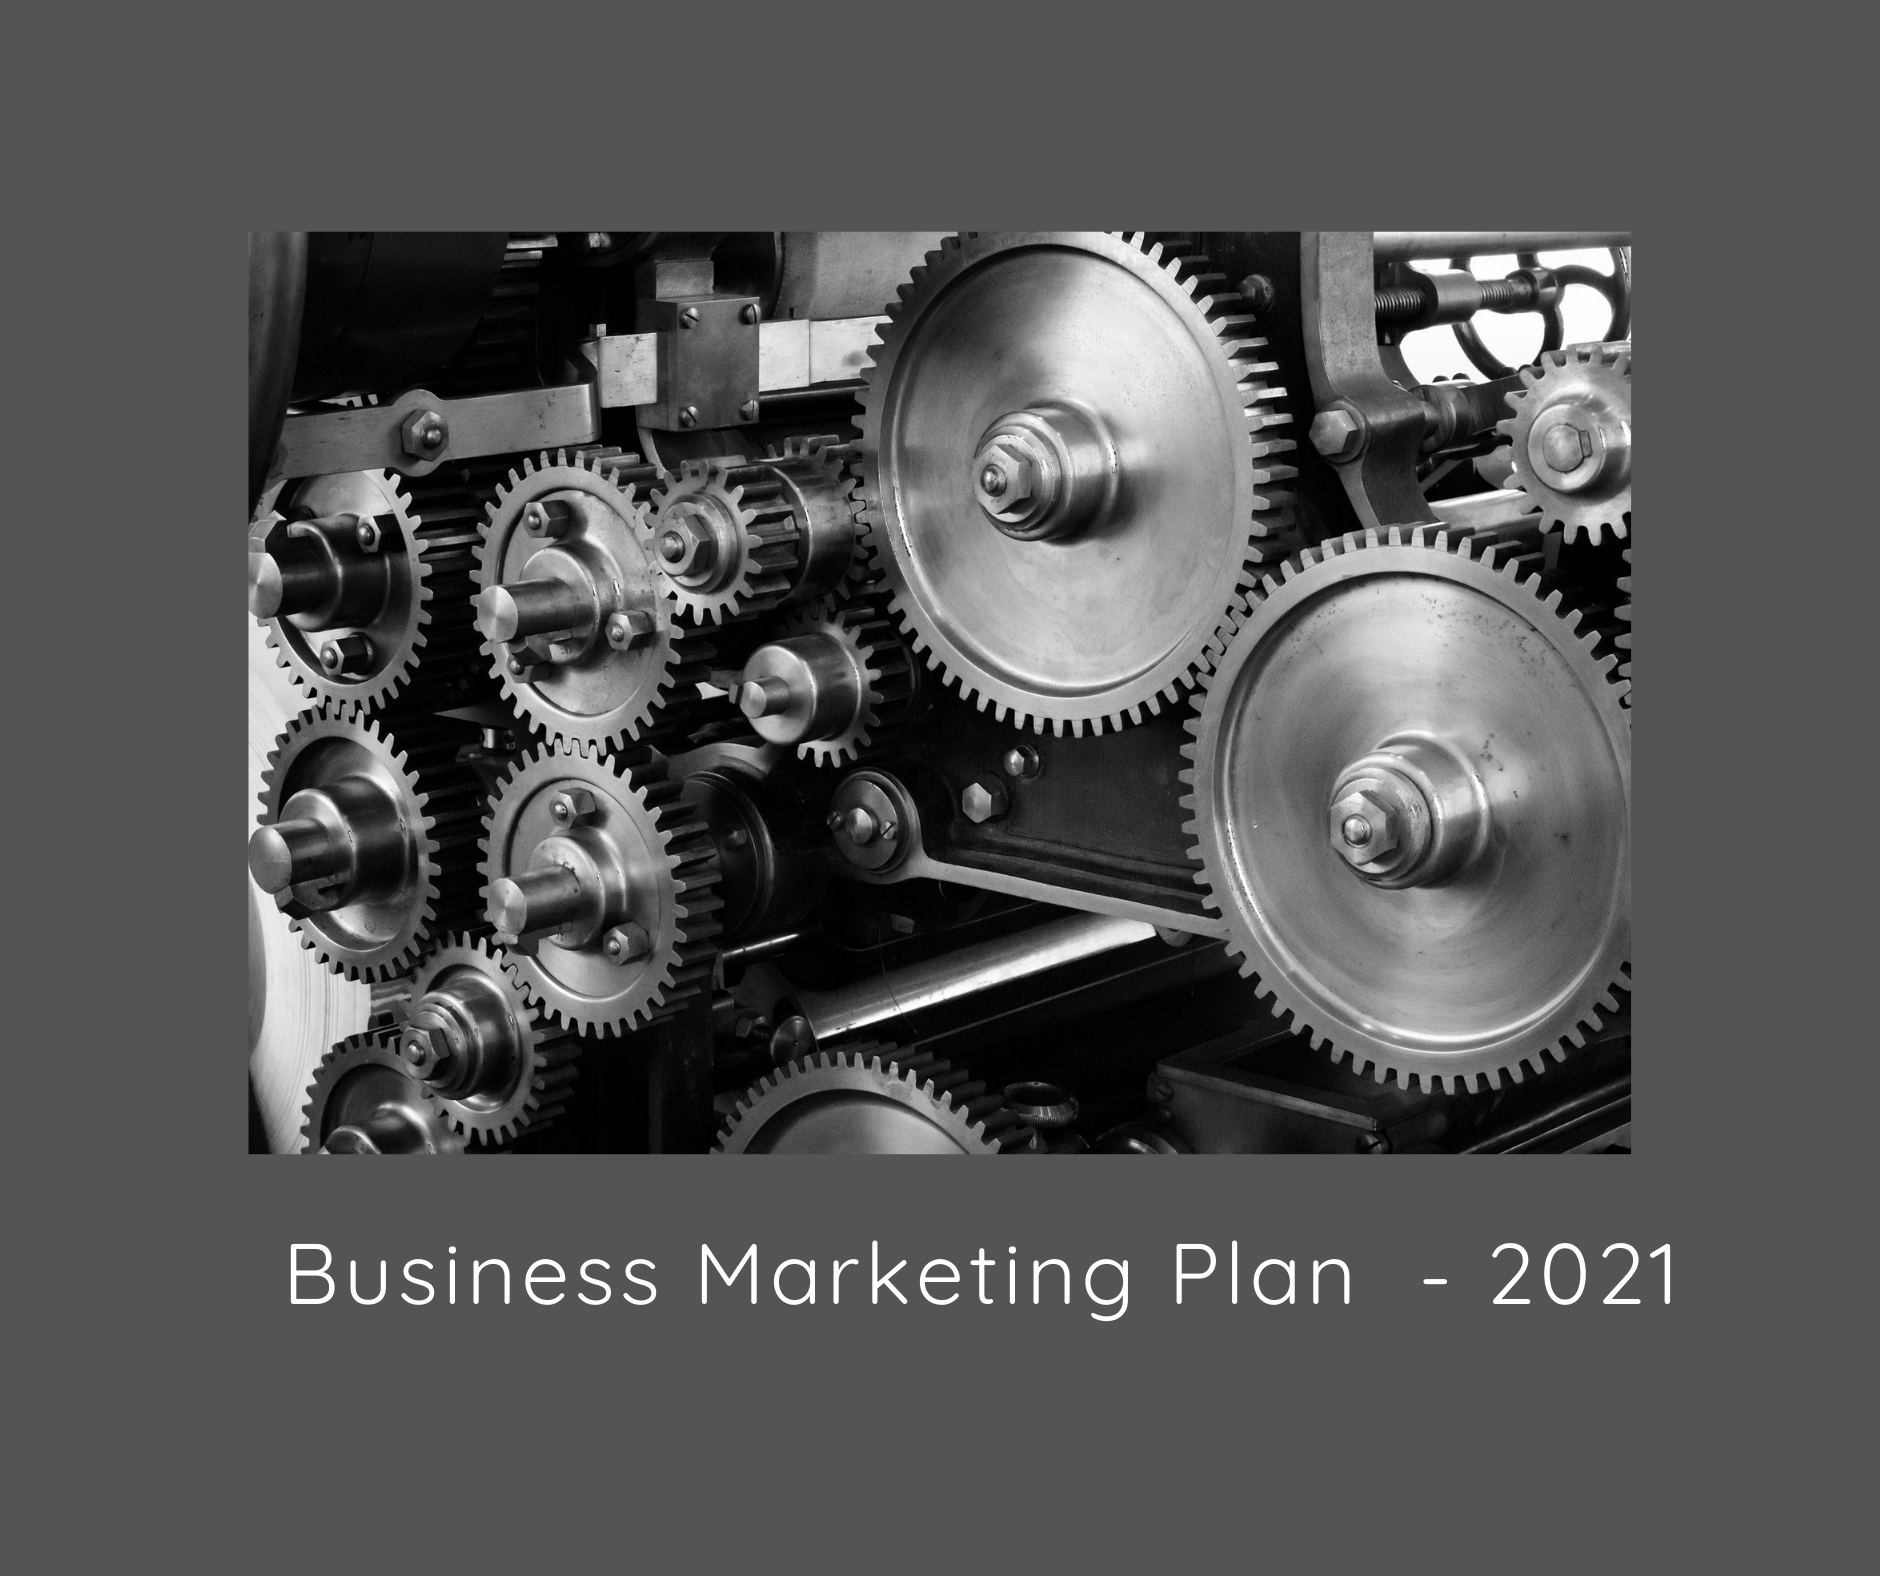 Marketing Plan Before Implementing Into Business 2021